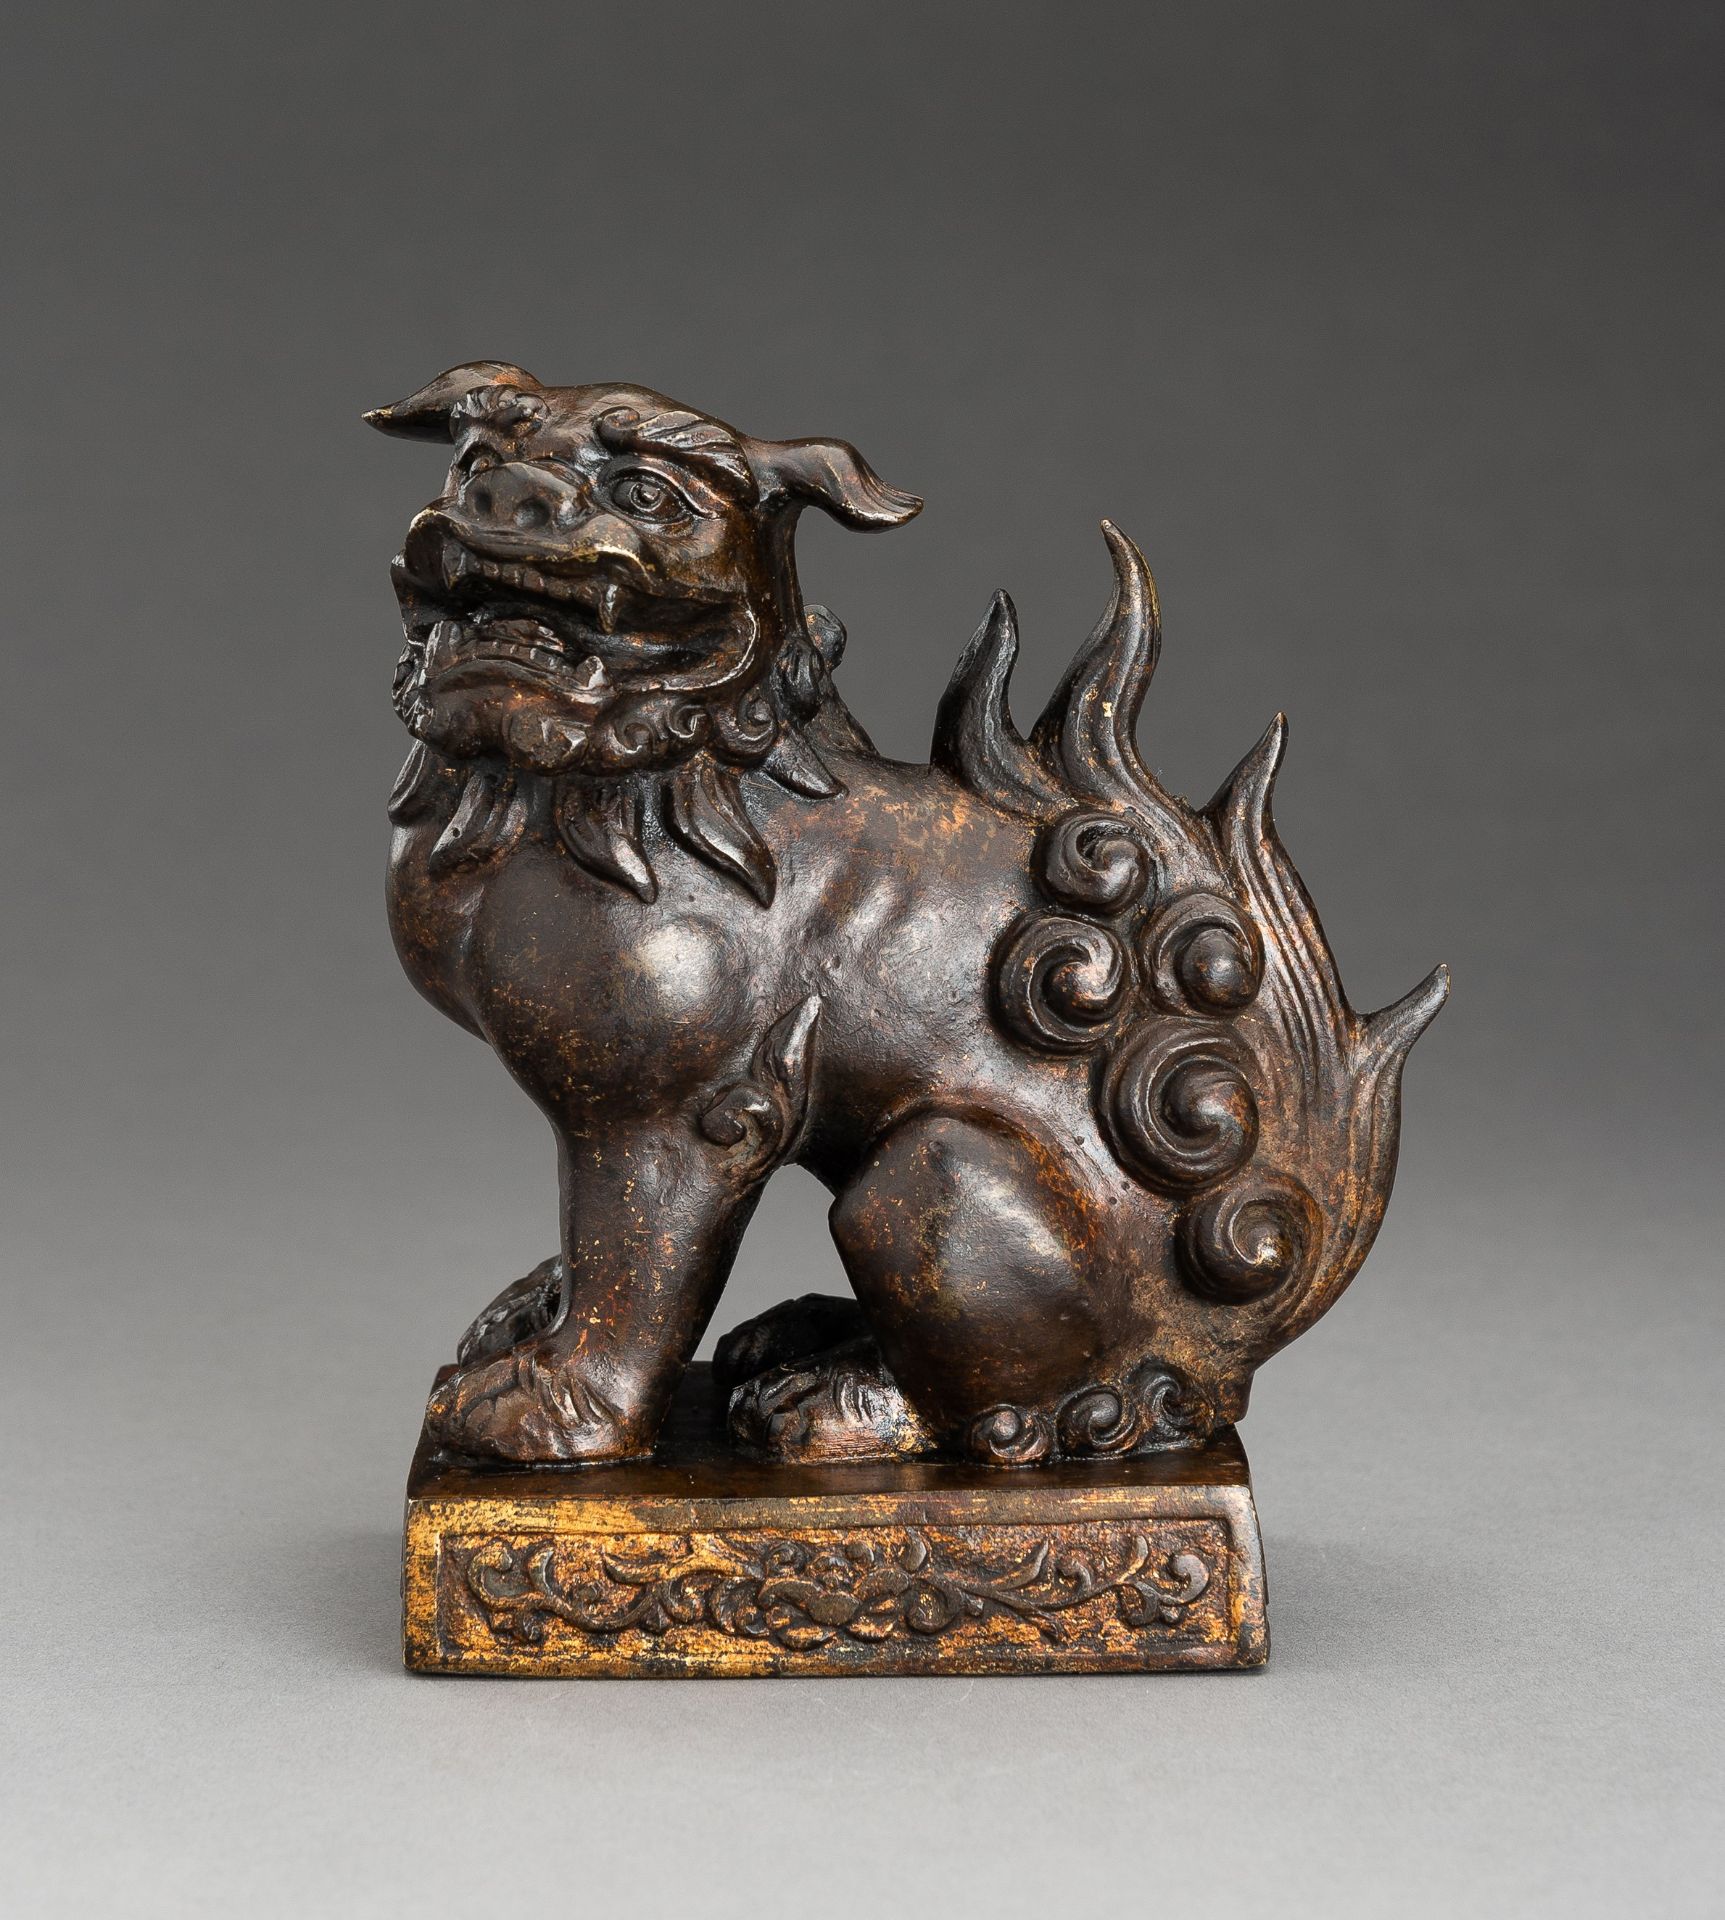 A LACQUER GILT BRONZE FIGURE OF A BUDDHIST LION, QING